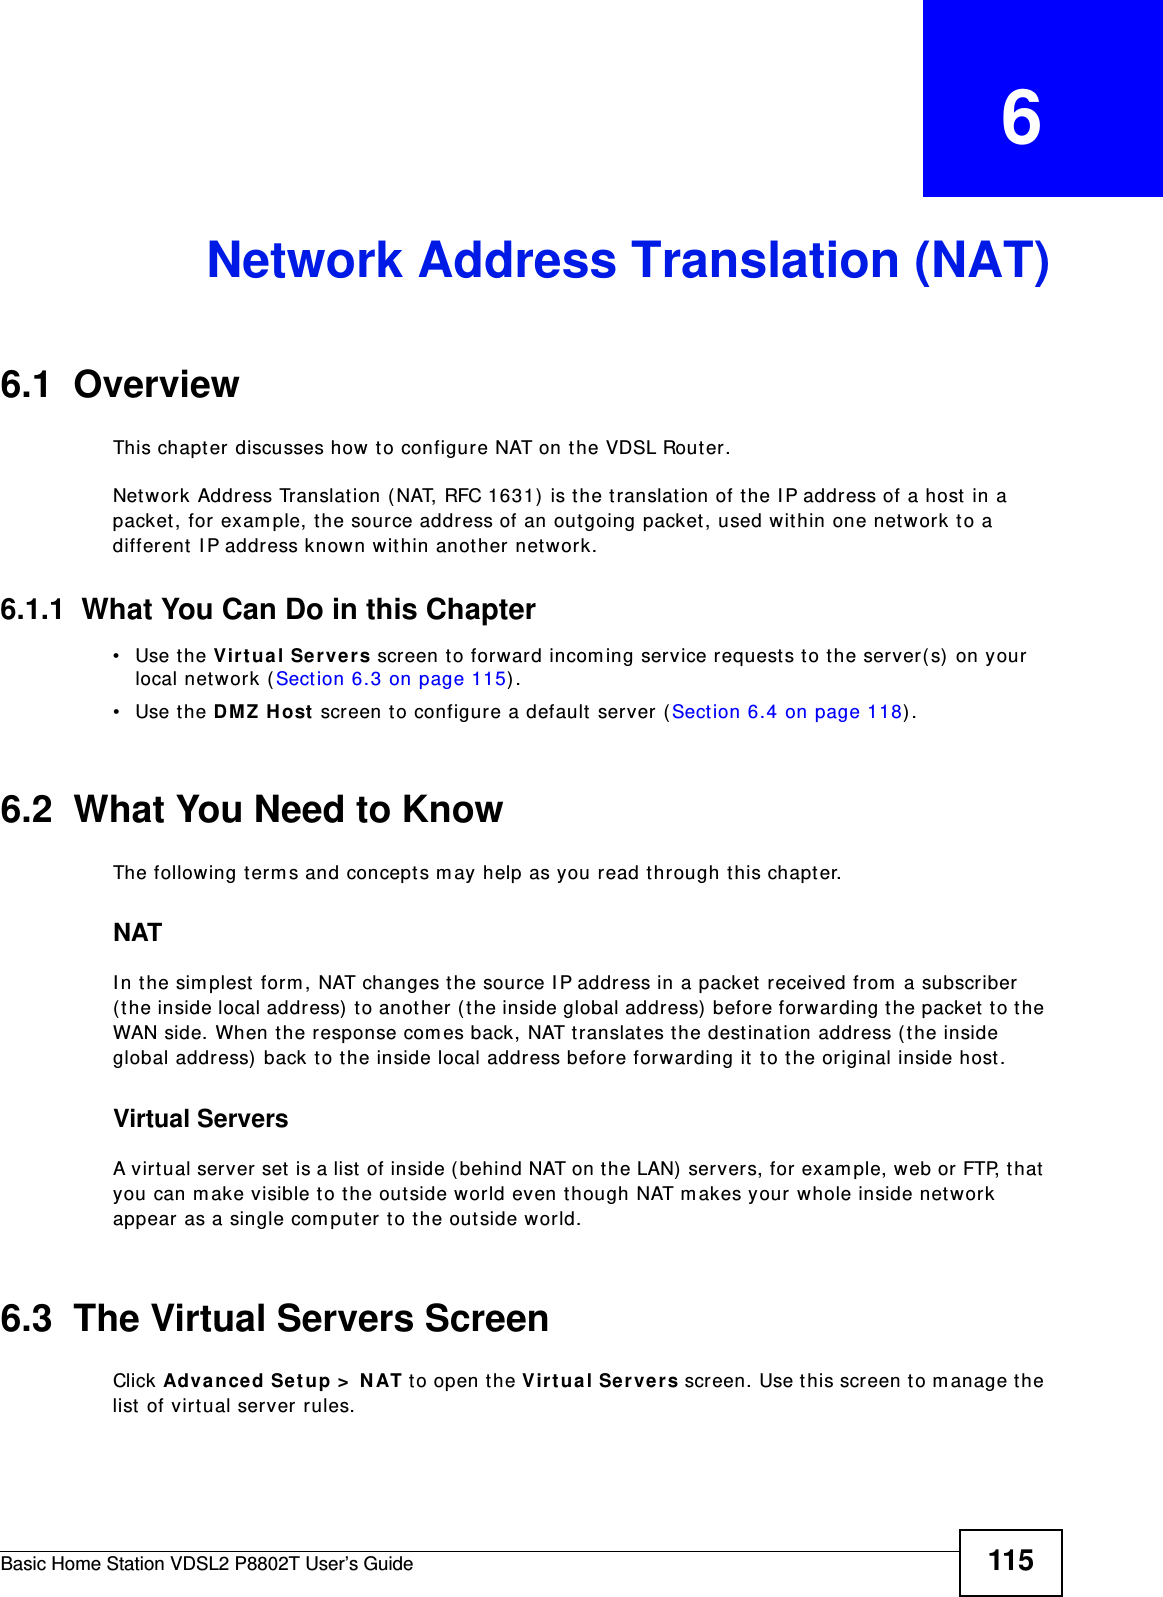 Basic Home Station VDSL2 P8802T User’s Guide 115CHAPTER   6Network Address Translation (NAT)6.1  Overview This chapt er discusses how t o configure NAT on the VDSL Router.Network Address Translation ( NAT, RFC 1631)  is t he t ranslation of the I P address of a host  in a packet, for exam ple, t he source address of an outgoing packet, used within one net work t o a different  I P address known within another network. 6.1.1  What You Can Do in this Chapter• Use the Vir t ua l Servers screen t o forward incom ing service requests t o t he server(s)  on your local net work ( Sect ion 6.3 on page 115) .• Use the D MZ H ost  screen t o configure a default server  (Sect ion 6.4 on page 118) .6.2  What You Need to KnowThe following t erm s and concept s m ay help as you read t hrough this chapt er.NATI n the sim plest  form , NAT changes the source I P address in a packet received from a subscriber ( the inside local address)  t o anot her ( t he inside global address)  befor e forwarding t he packet t o t he WAN side. When t he response com es back, NAT translates t he dest inat ion address ( t he inside global address)  back to the inside local address before forwarding it to the original inside host .Virtual ServersA virt ual server set  is a list  of inside (behind NAT on the LAN)  servers, for exam ple, web or FTP, that  you can m ake visible to the out side world even though NAT m akes your  whole inside netw ork appear as a single com puter to the outside world.6.3  The Virtual Servers ScreenClick Advance d Setup &gt;  N AT t o open the Virt ua l Se rver s screen. Use t his screen t o m anage the list  of virt ual ser ver rules.